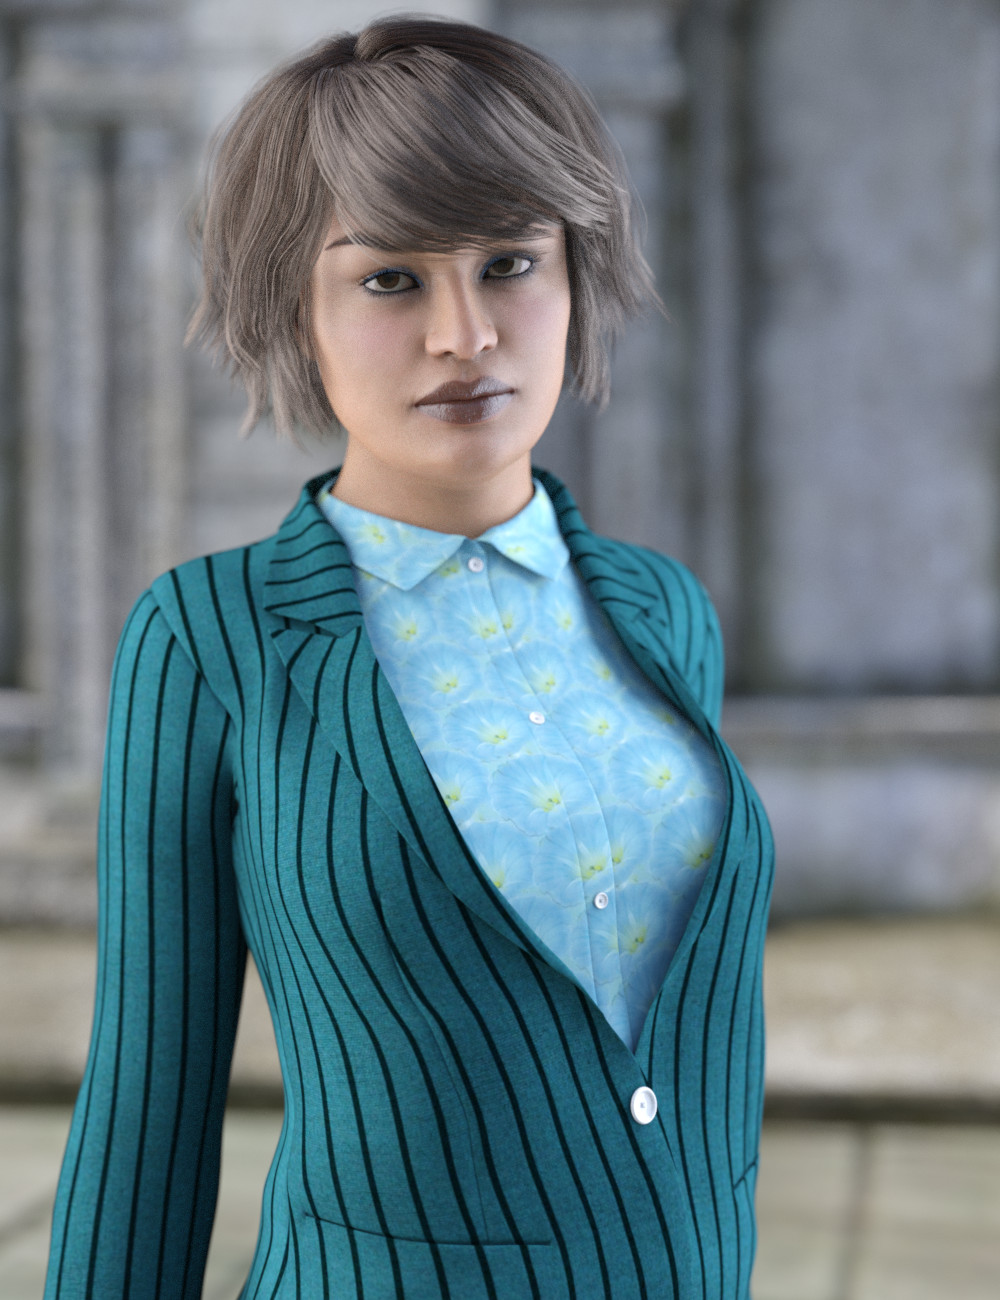 FSL Serious Business Mix and Match Shaders by: Fuseling, 3D Models by Daz 3D